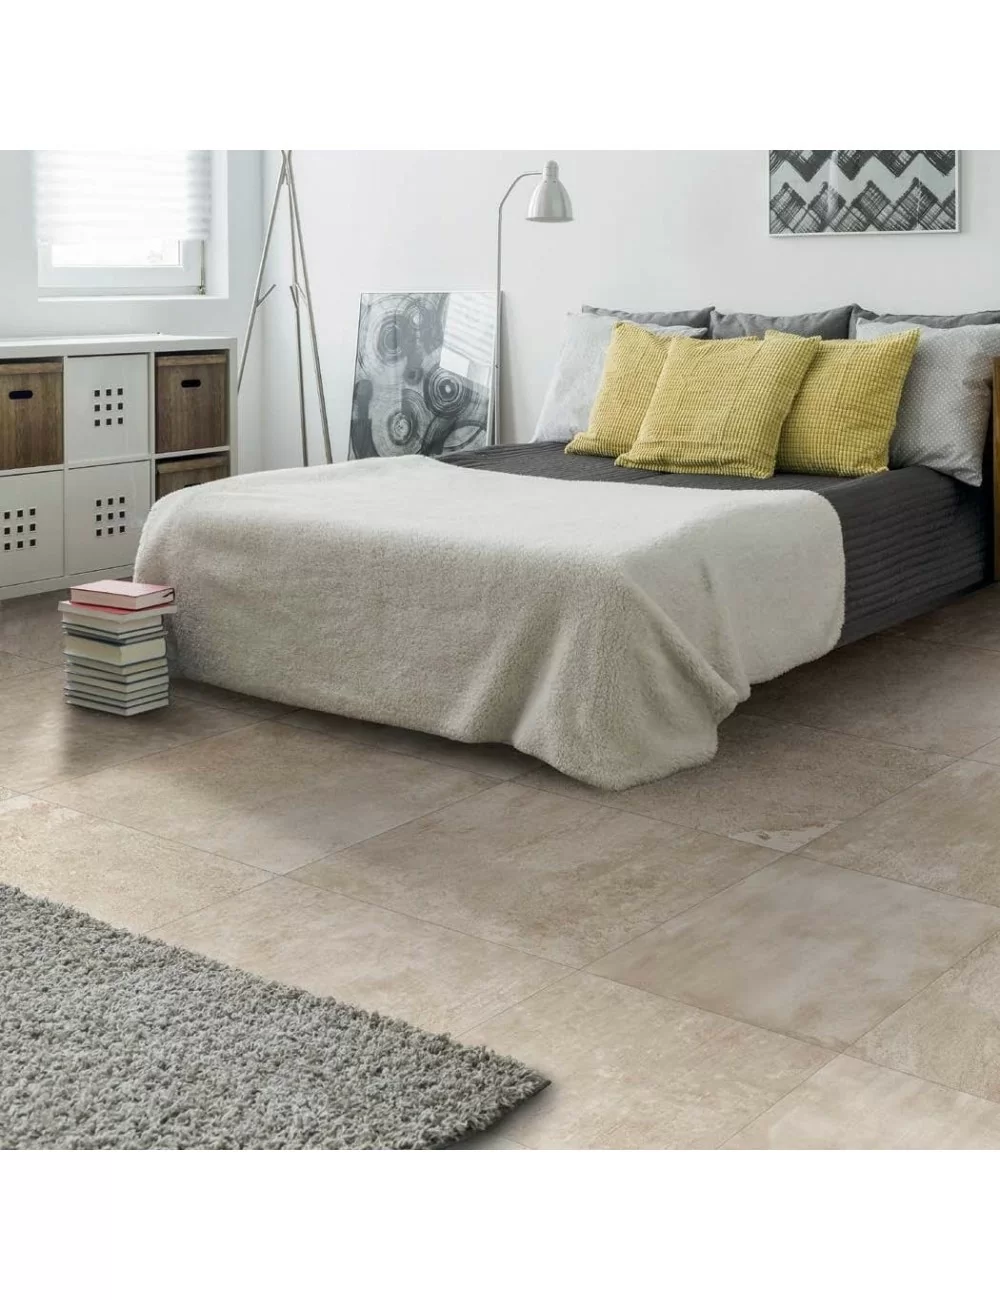 color beige cement effect tile endymion paper laid in bedroom